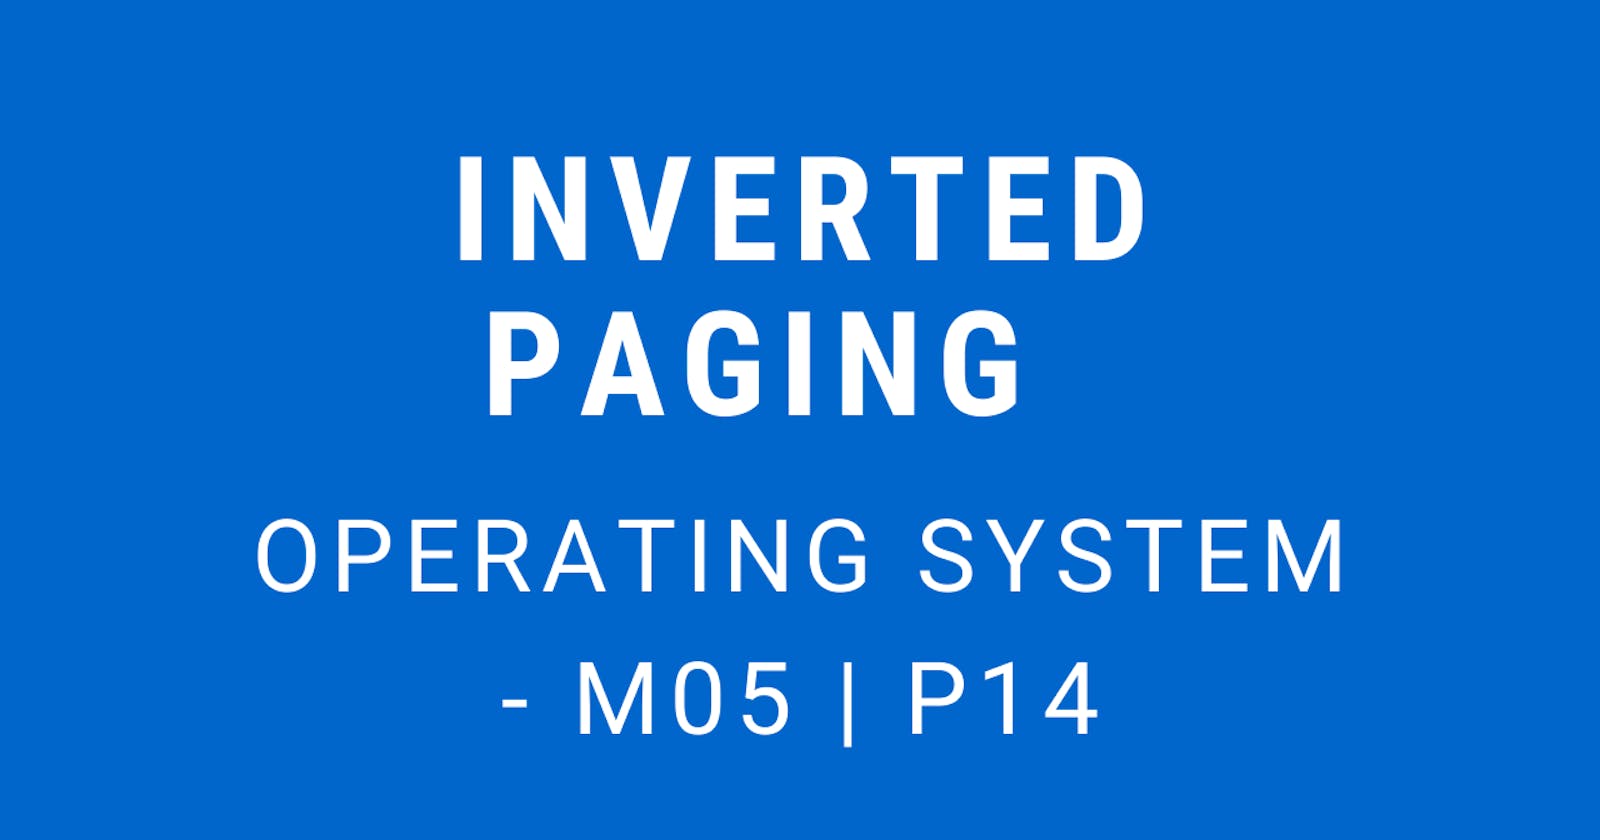 Inverted Paging | Operating System - M05 P14